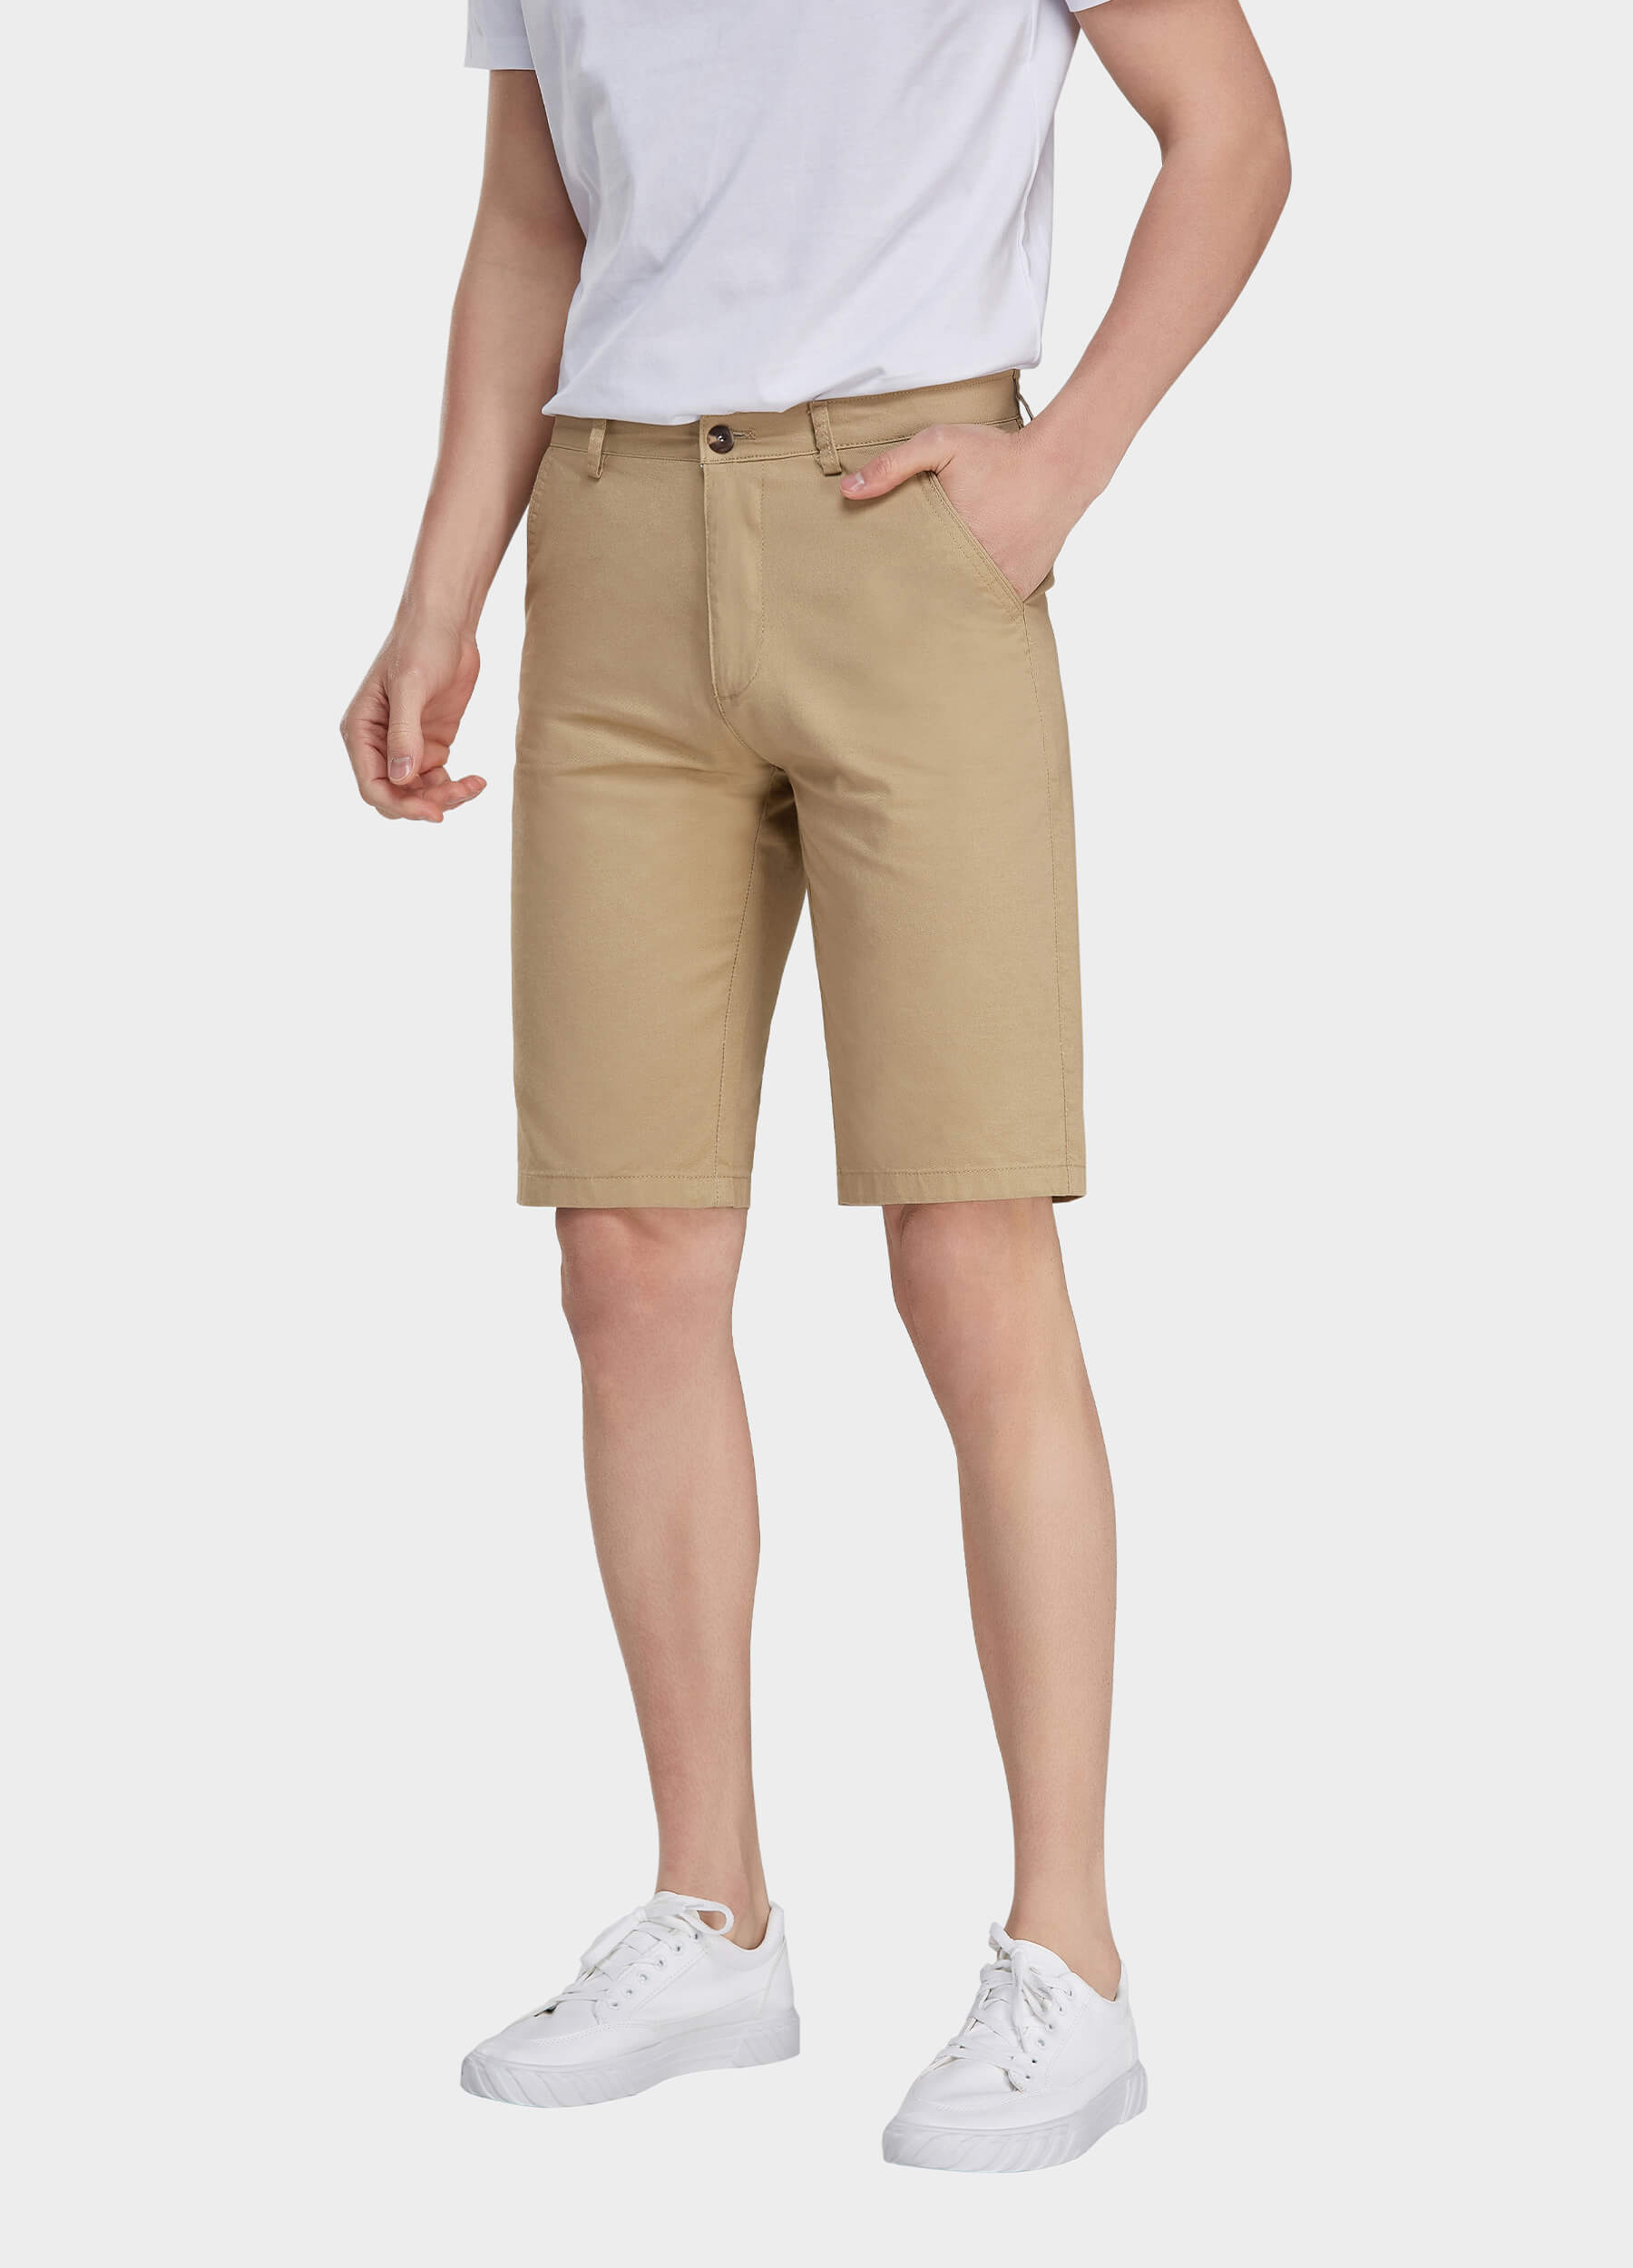 Men's Casual Zipper Fly Button Solid Shorts with Slant Pocket-Khaki